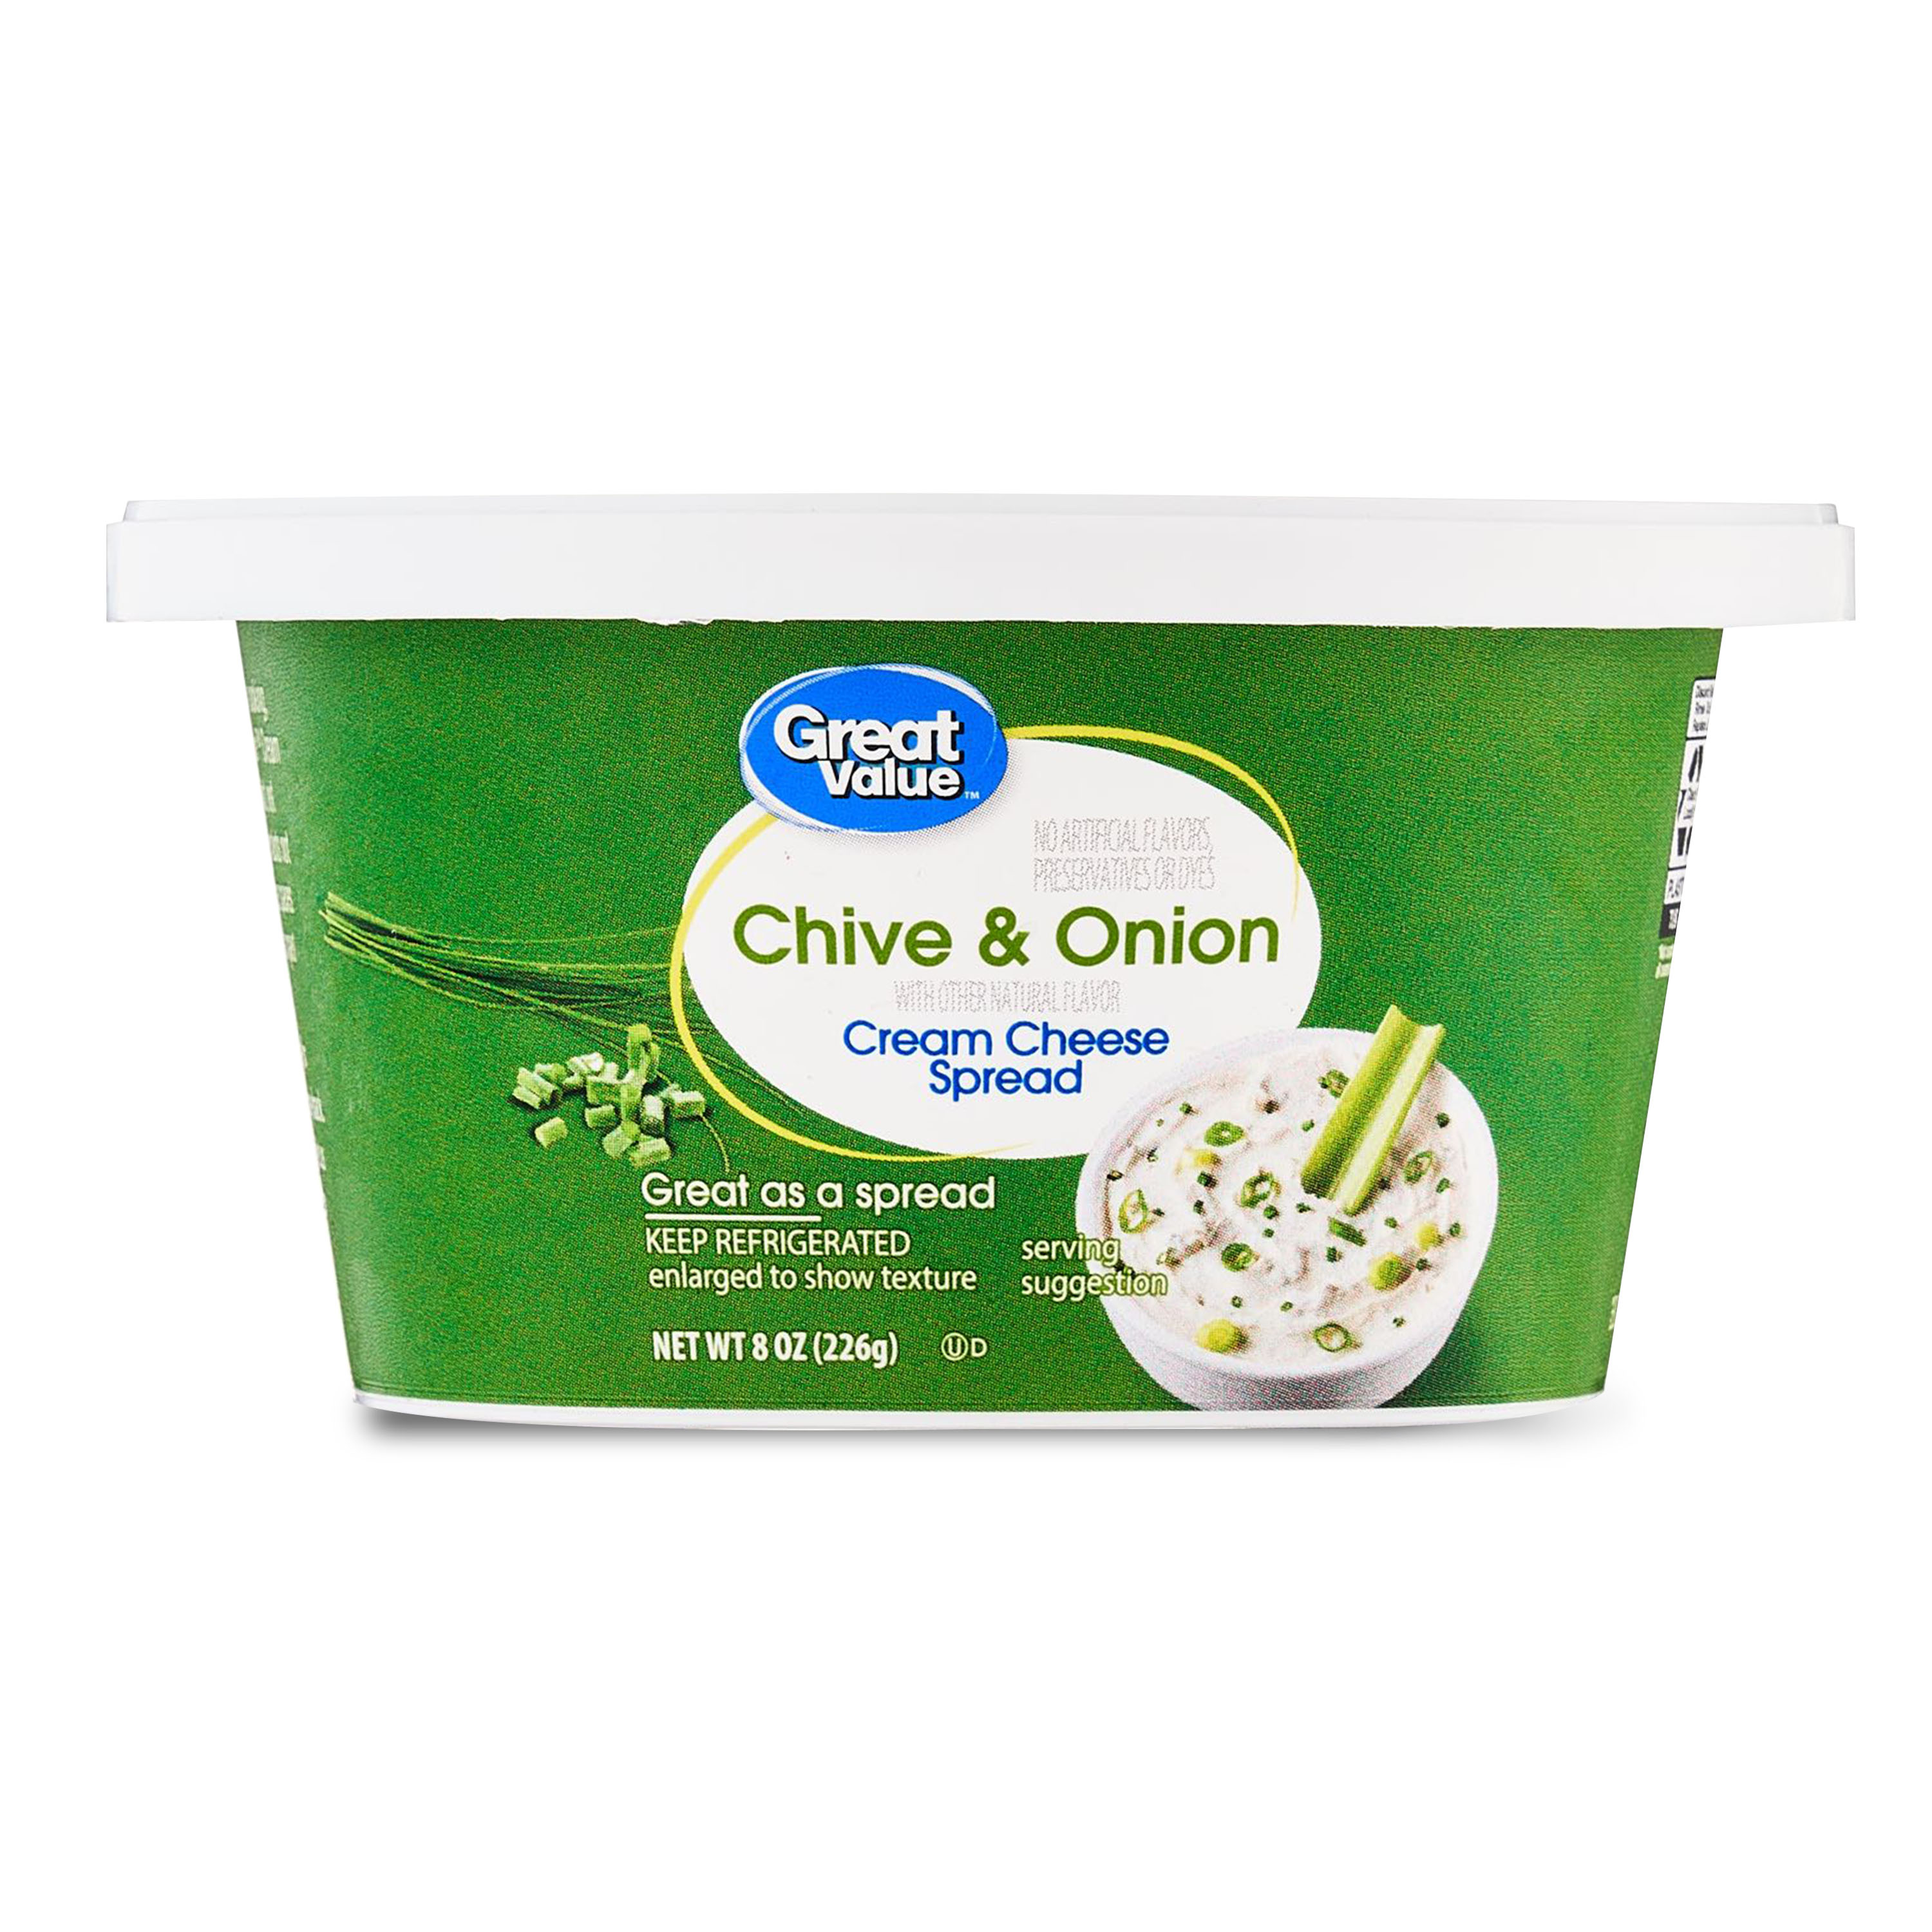 Great Value Chive & Onion Cream Cheese Spread, 8 oz Tub - image 1 of 7